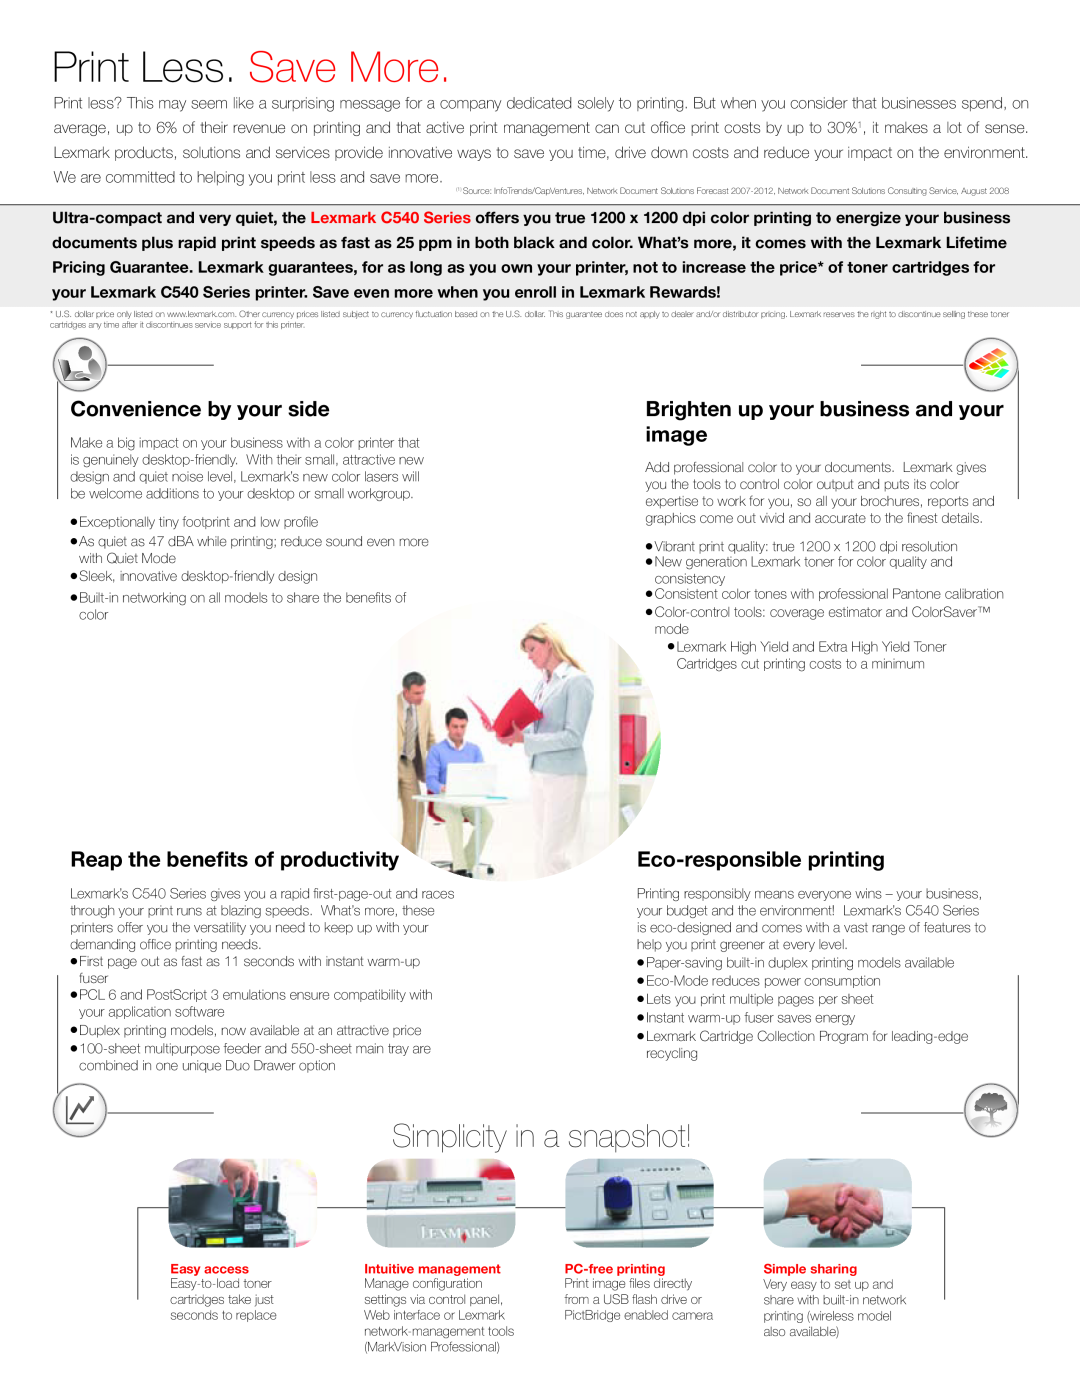 Lexmark C540 Series Simplicity in a snapshot, Print Less. Save More, Convenience by your side, Eco-responsibleprinting 